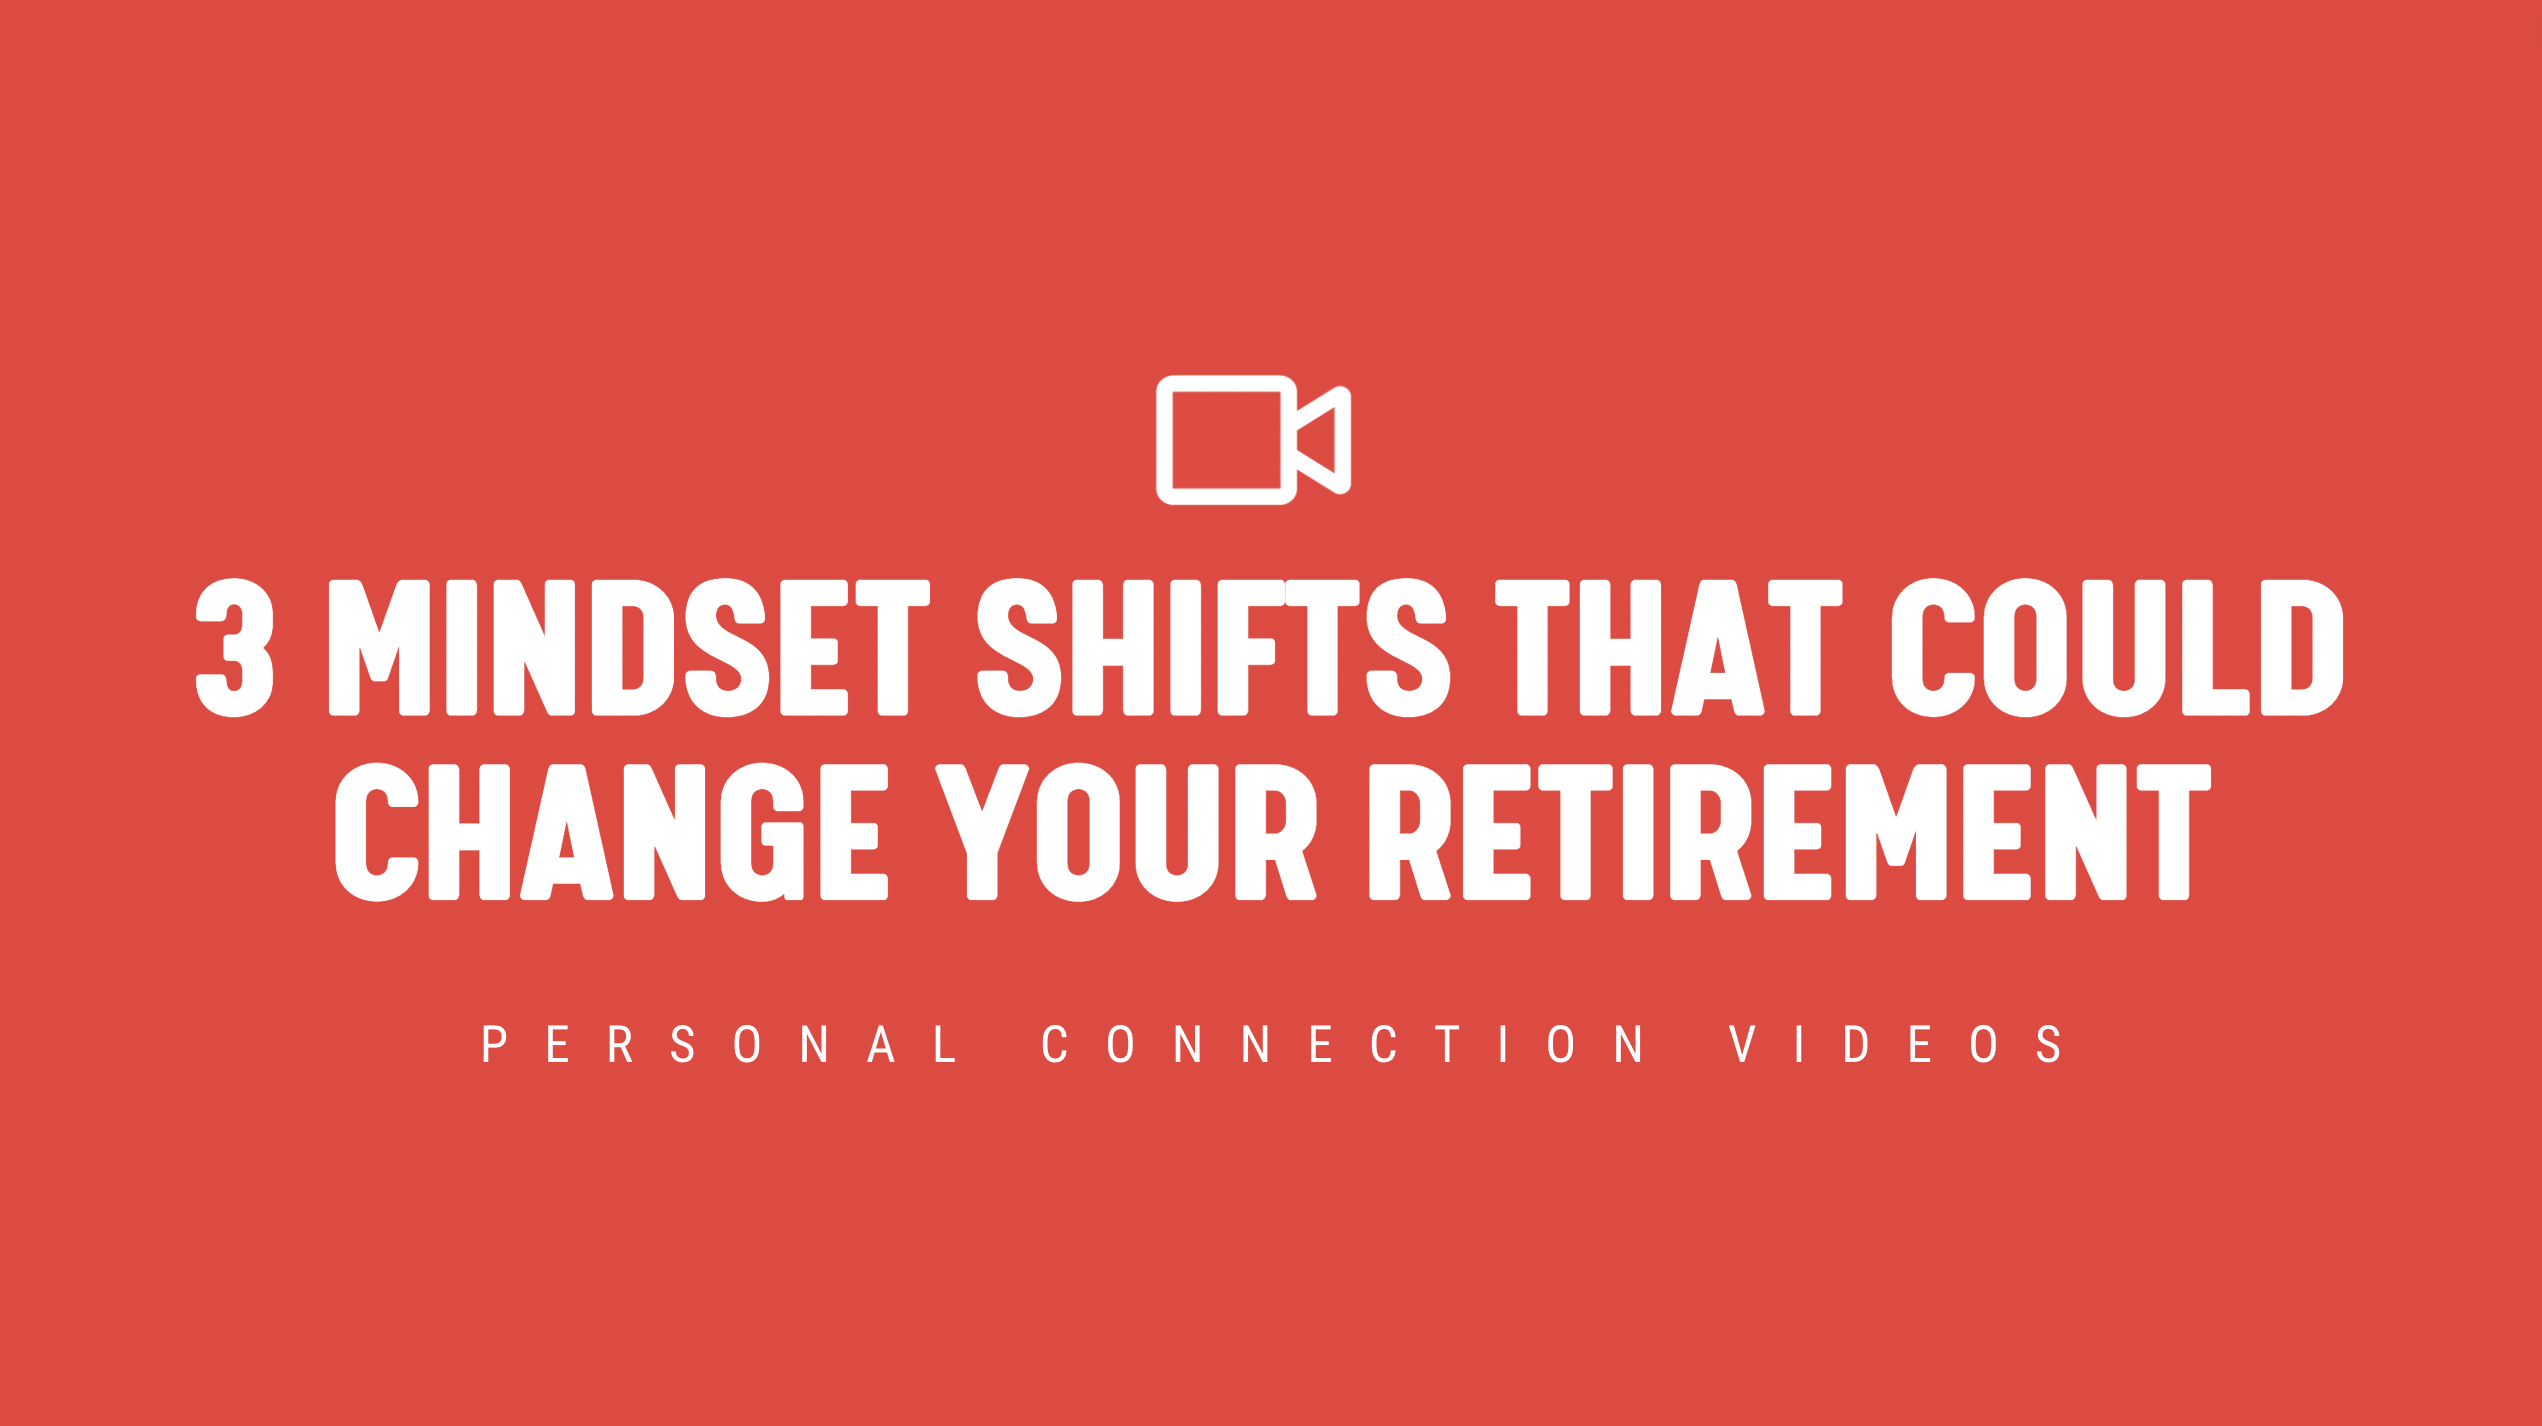 [NEW] 3 Mindset Shifts that Could Change Your Retirement - Personal Connection Video